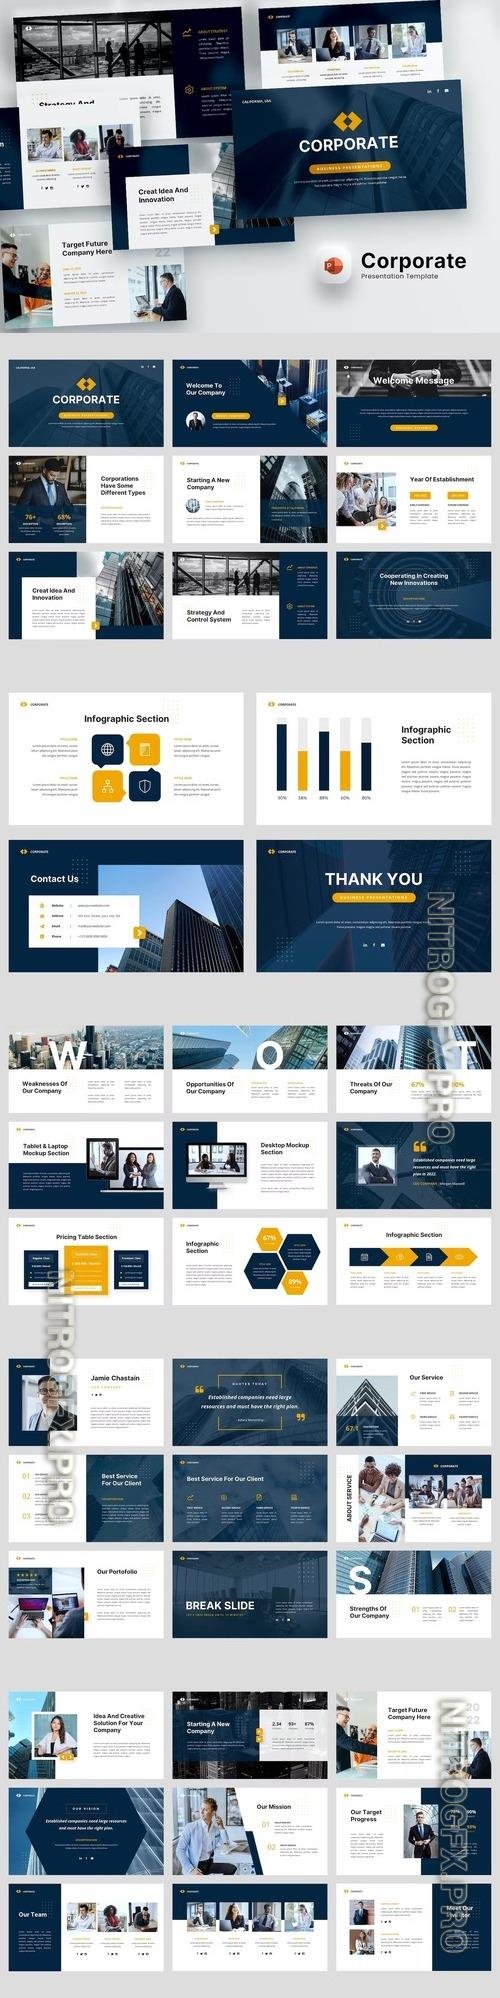 Corporate - Company Profile Powerpoint Template